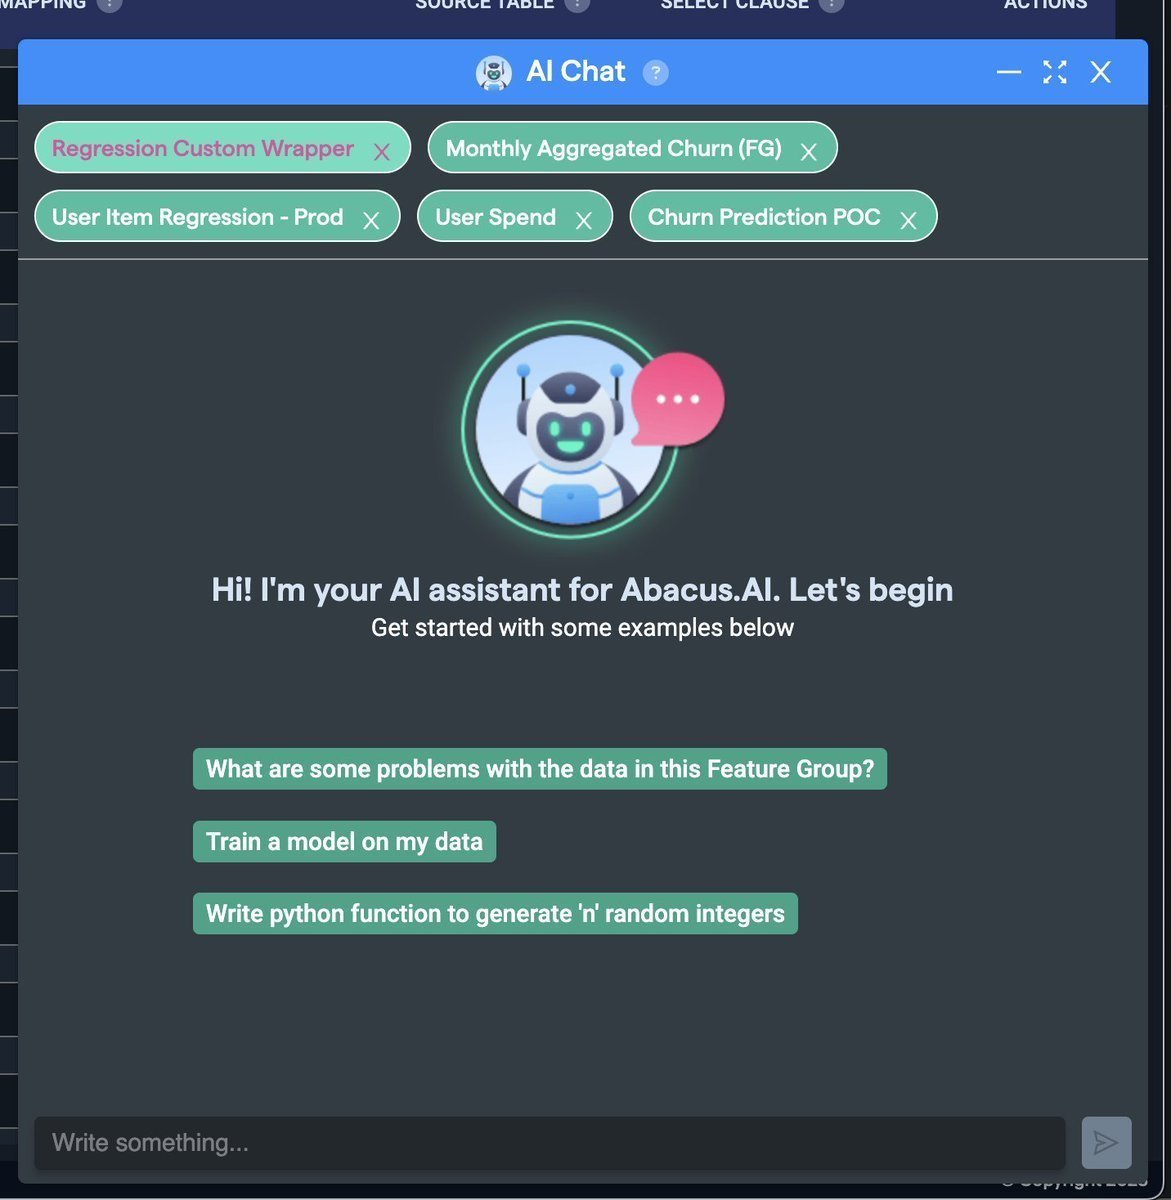 The future of #DataScience #MachineLearning #MLOps is here! You can talk to the @AbacusAI #AI and tell it to:
1. Clean your data.
2. Create #ML features.
3. Train & deploy models.
4. Monitor the models in production.
🚀🚀
=> an incredible aid to #DataScientists building systems.